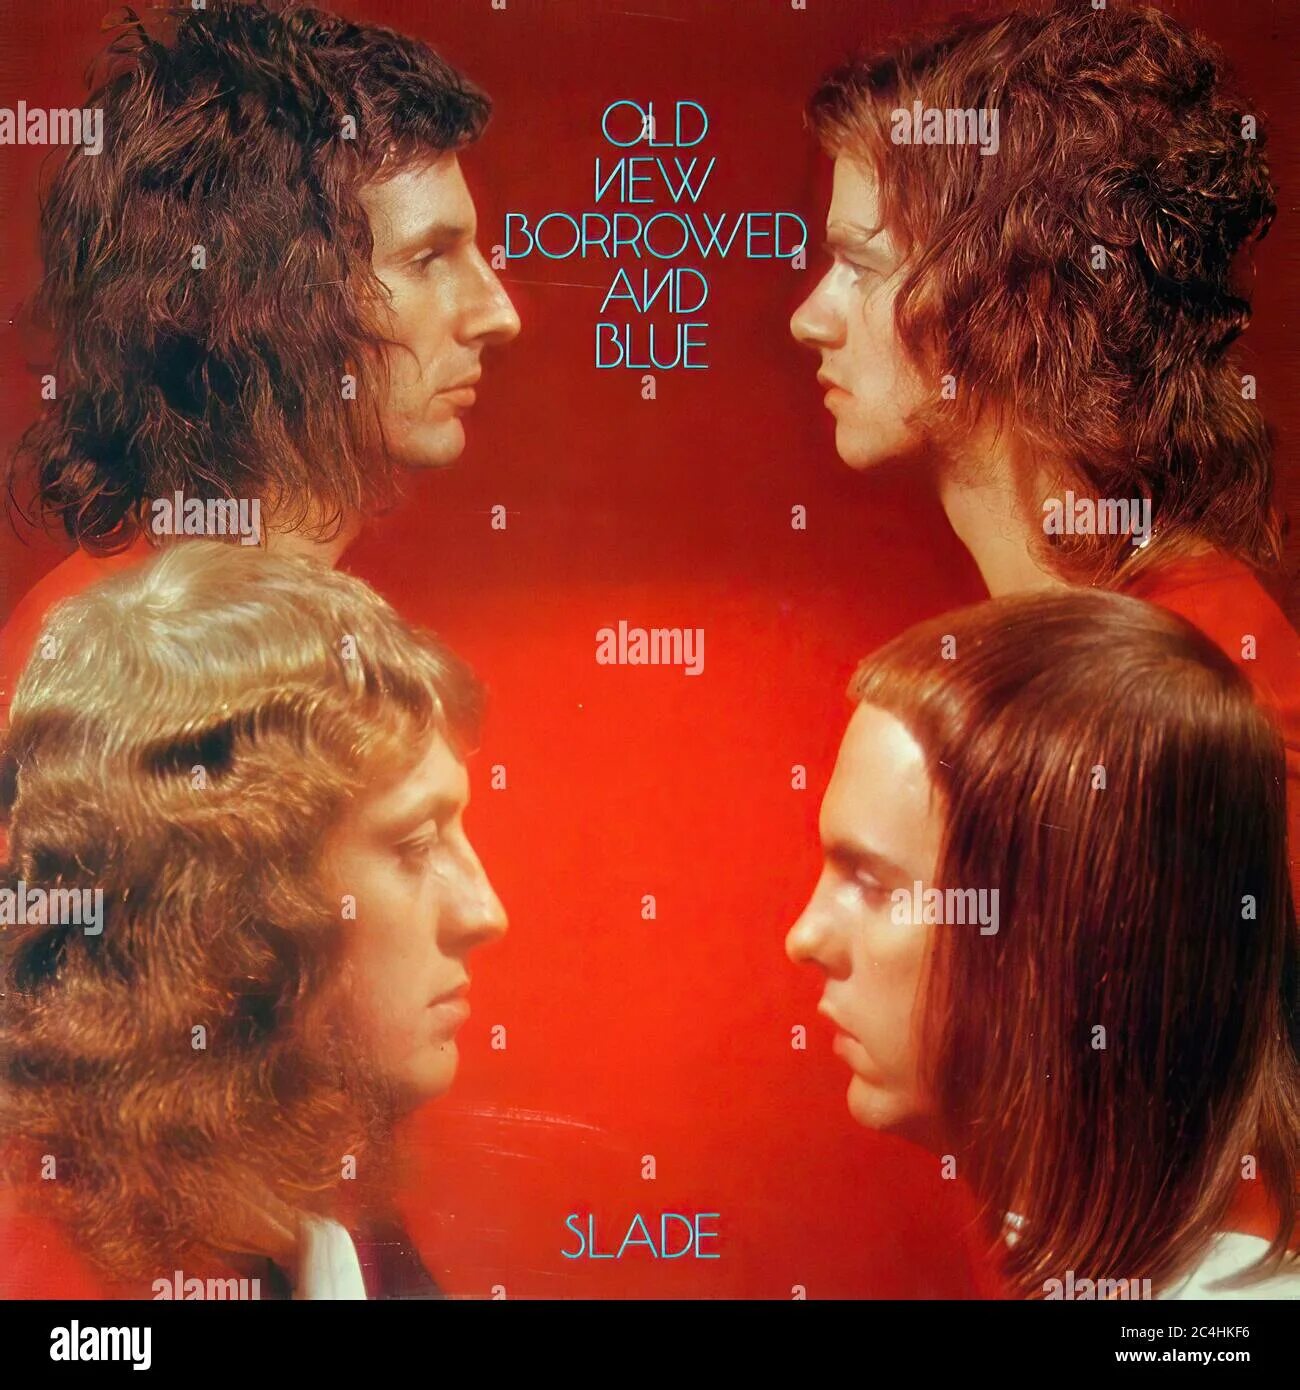 Old new borrowed. Slade old New Borrowed and Blue 1974. Slade old New Borrowed and Blue 1974 обложка. Slade альбом Borrowed. Old New Borrowed and Blue.